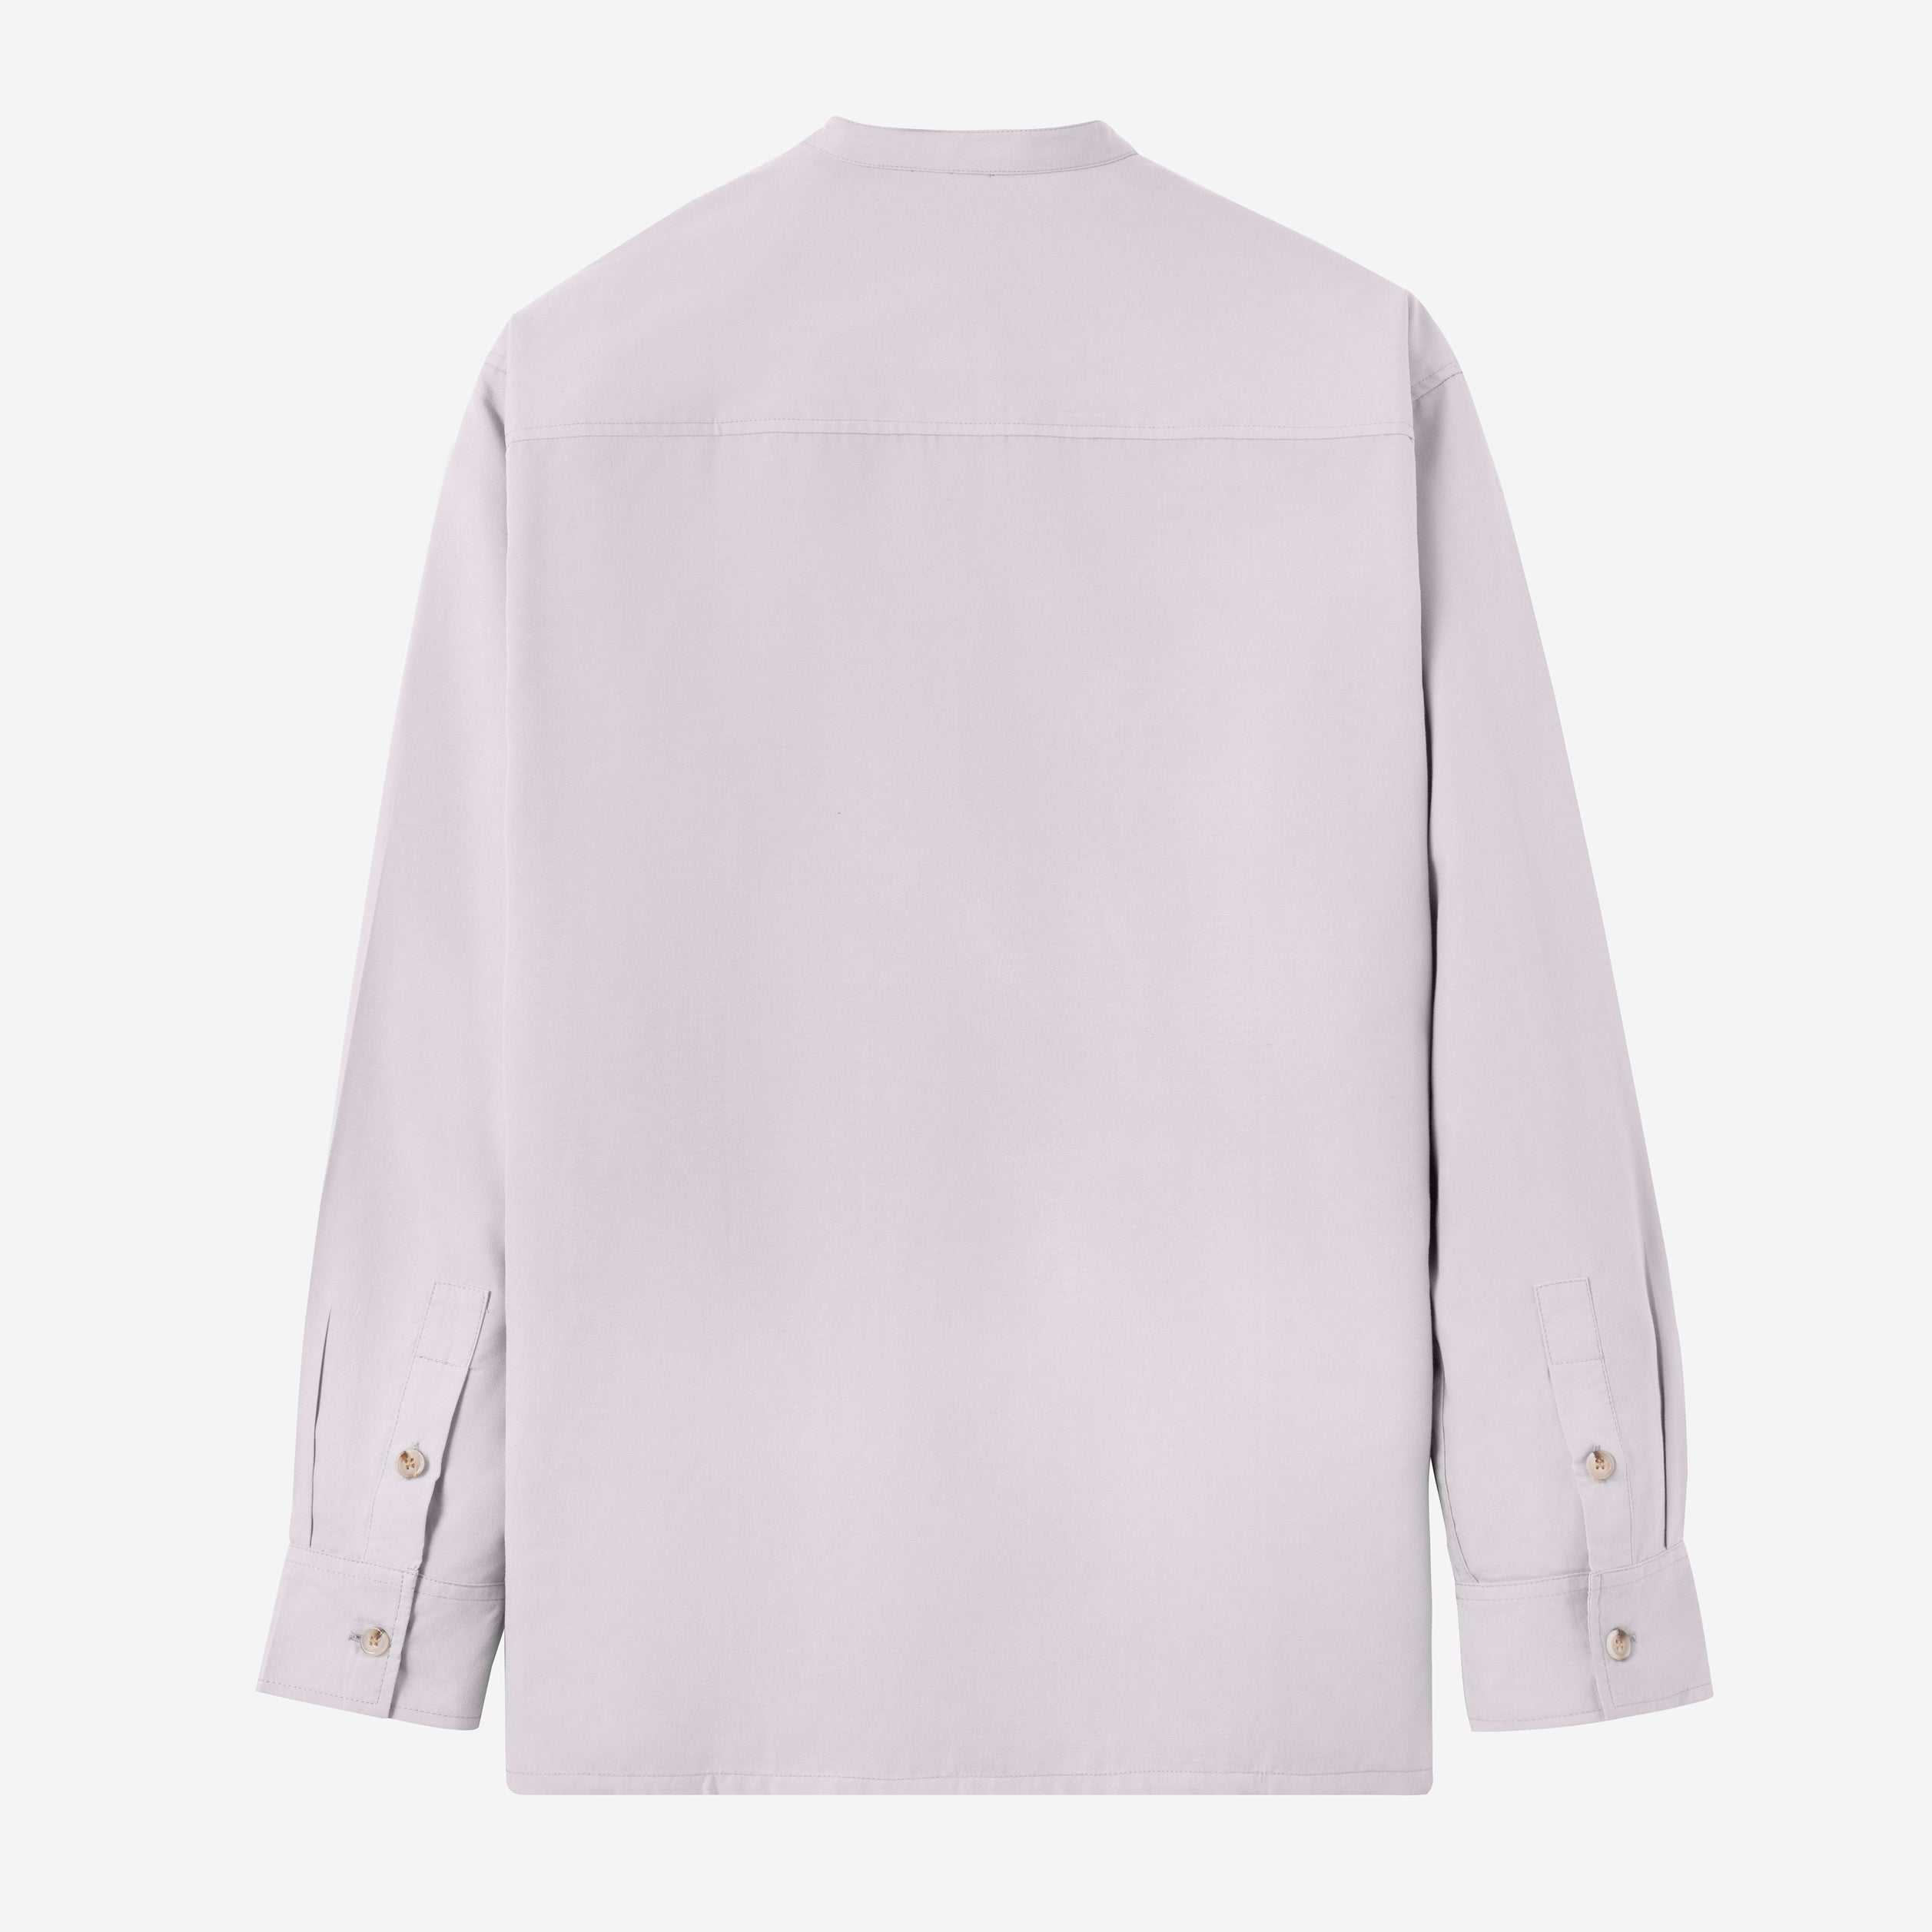 FACTORY SALE - Dhaw' Long Sleeve - White